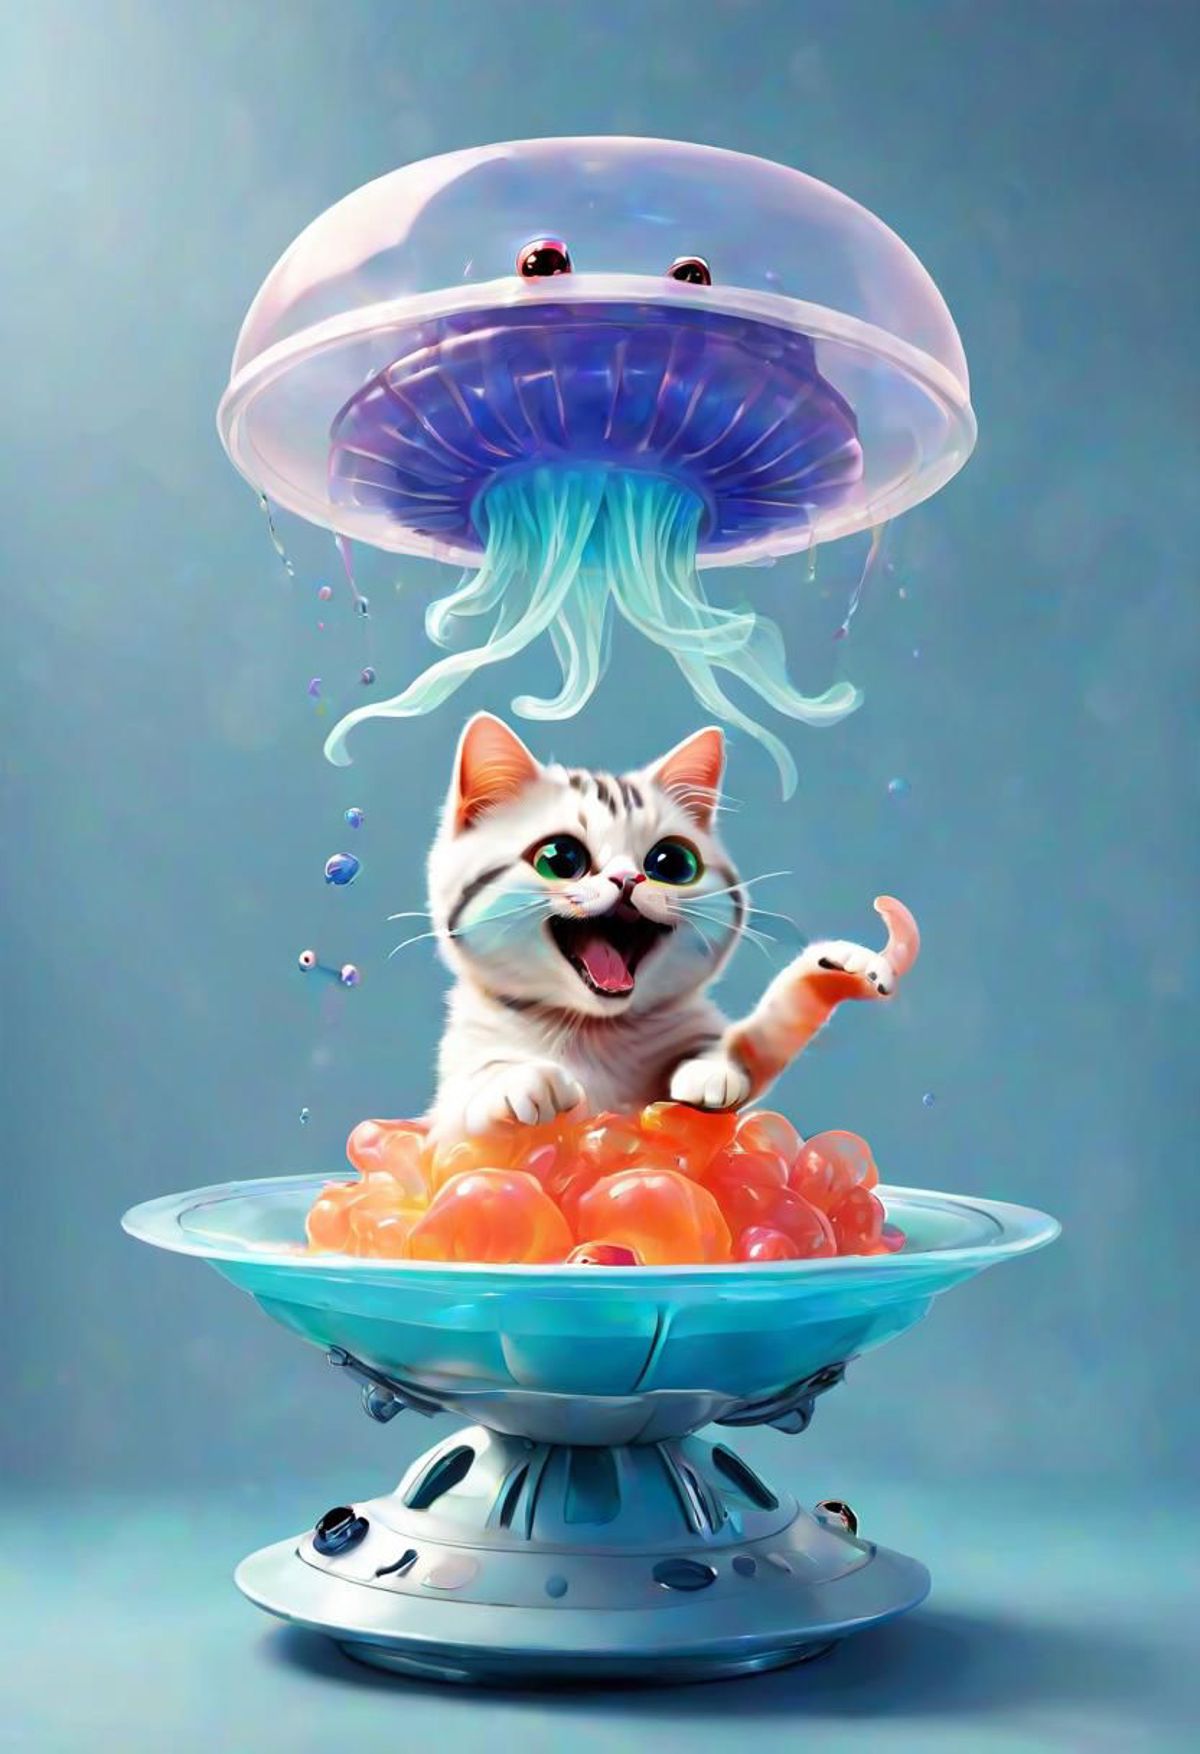 A cute kitten sitting in a bowl of jelly beans, surrounded by a bubble.